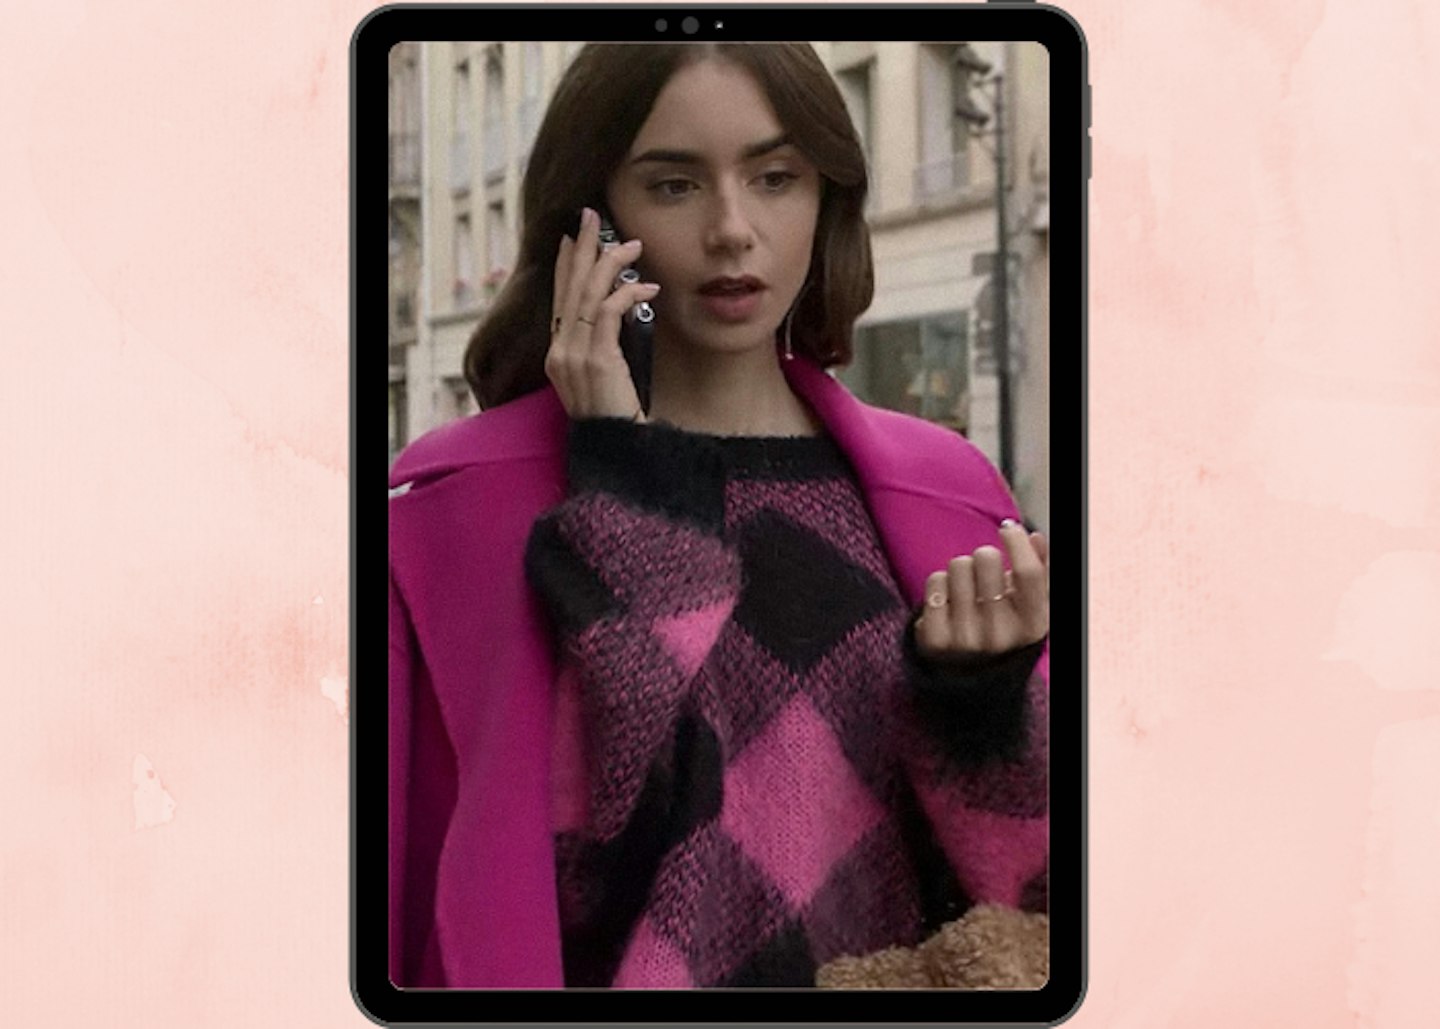 Emily in Paris Season 1 Episode 9 outfit pink checkered coat